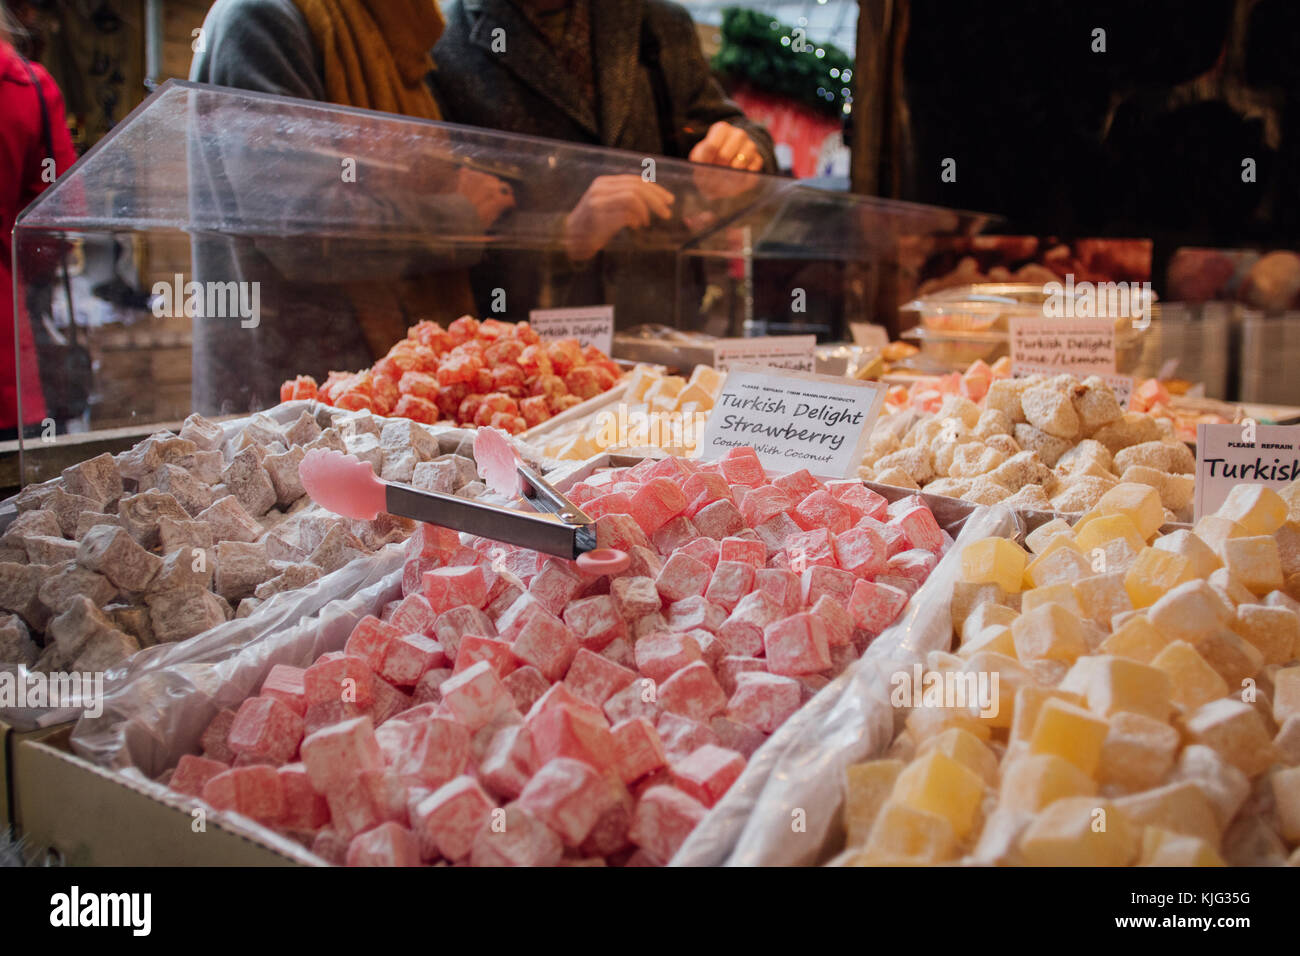 Turkish delight at a city christmas market pop up stall Stock Photo - Alamy